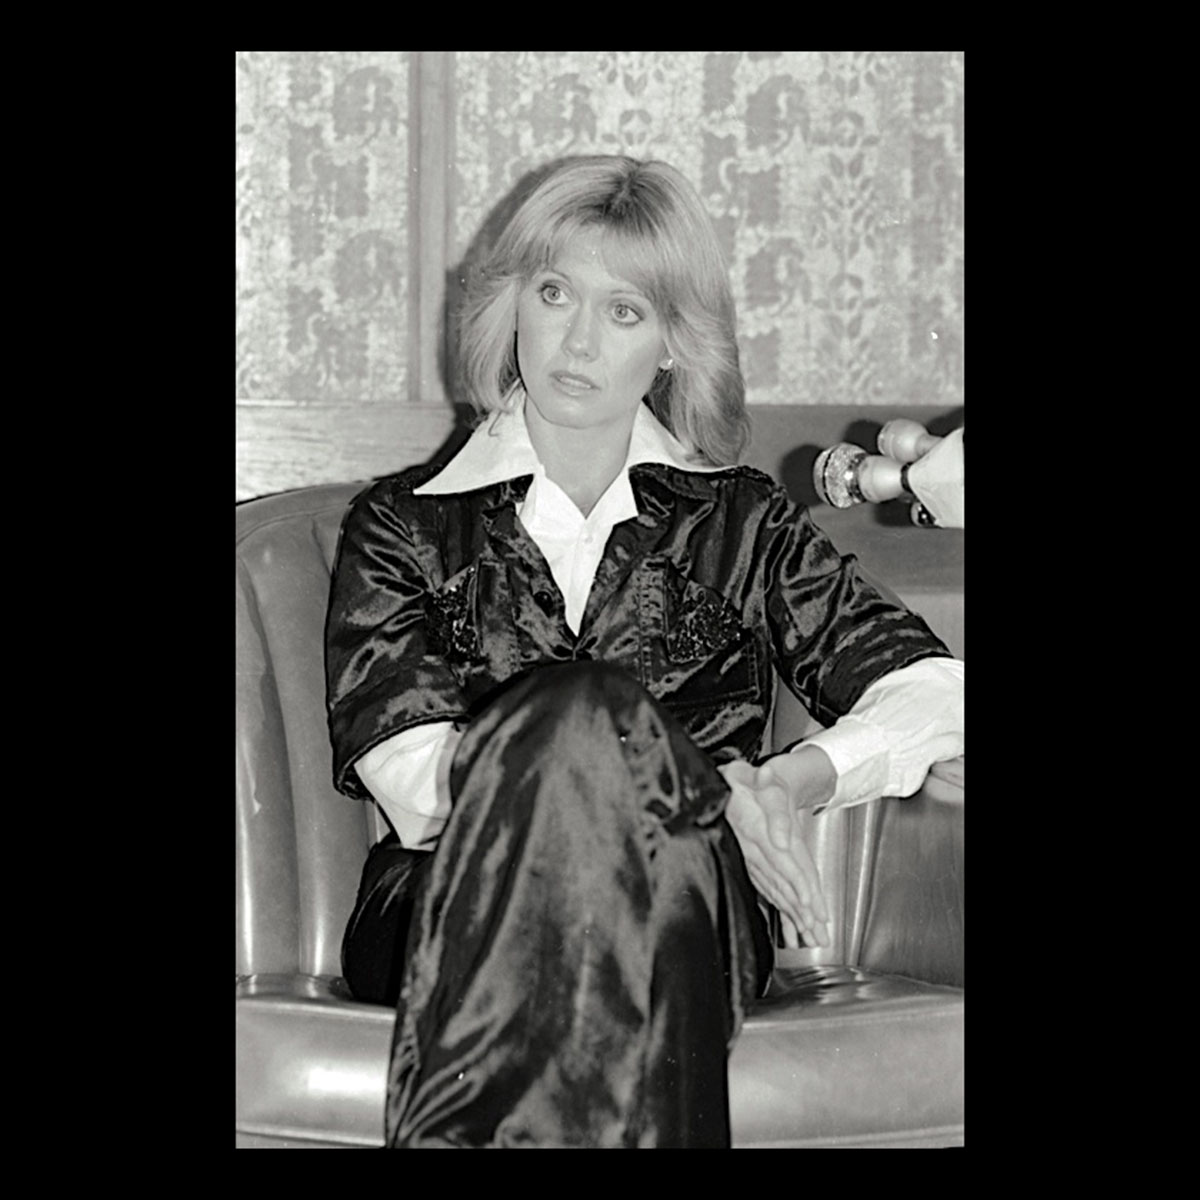 Fond Memories of a Meeting with Olivia Newton-John by Keith Sharp